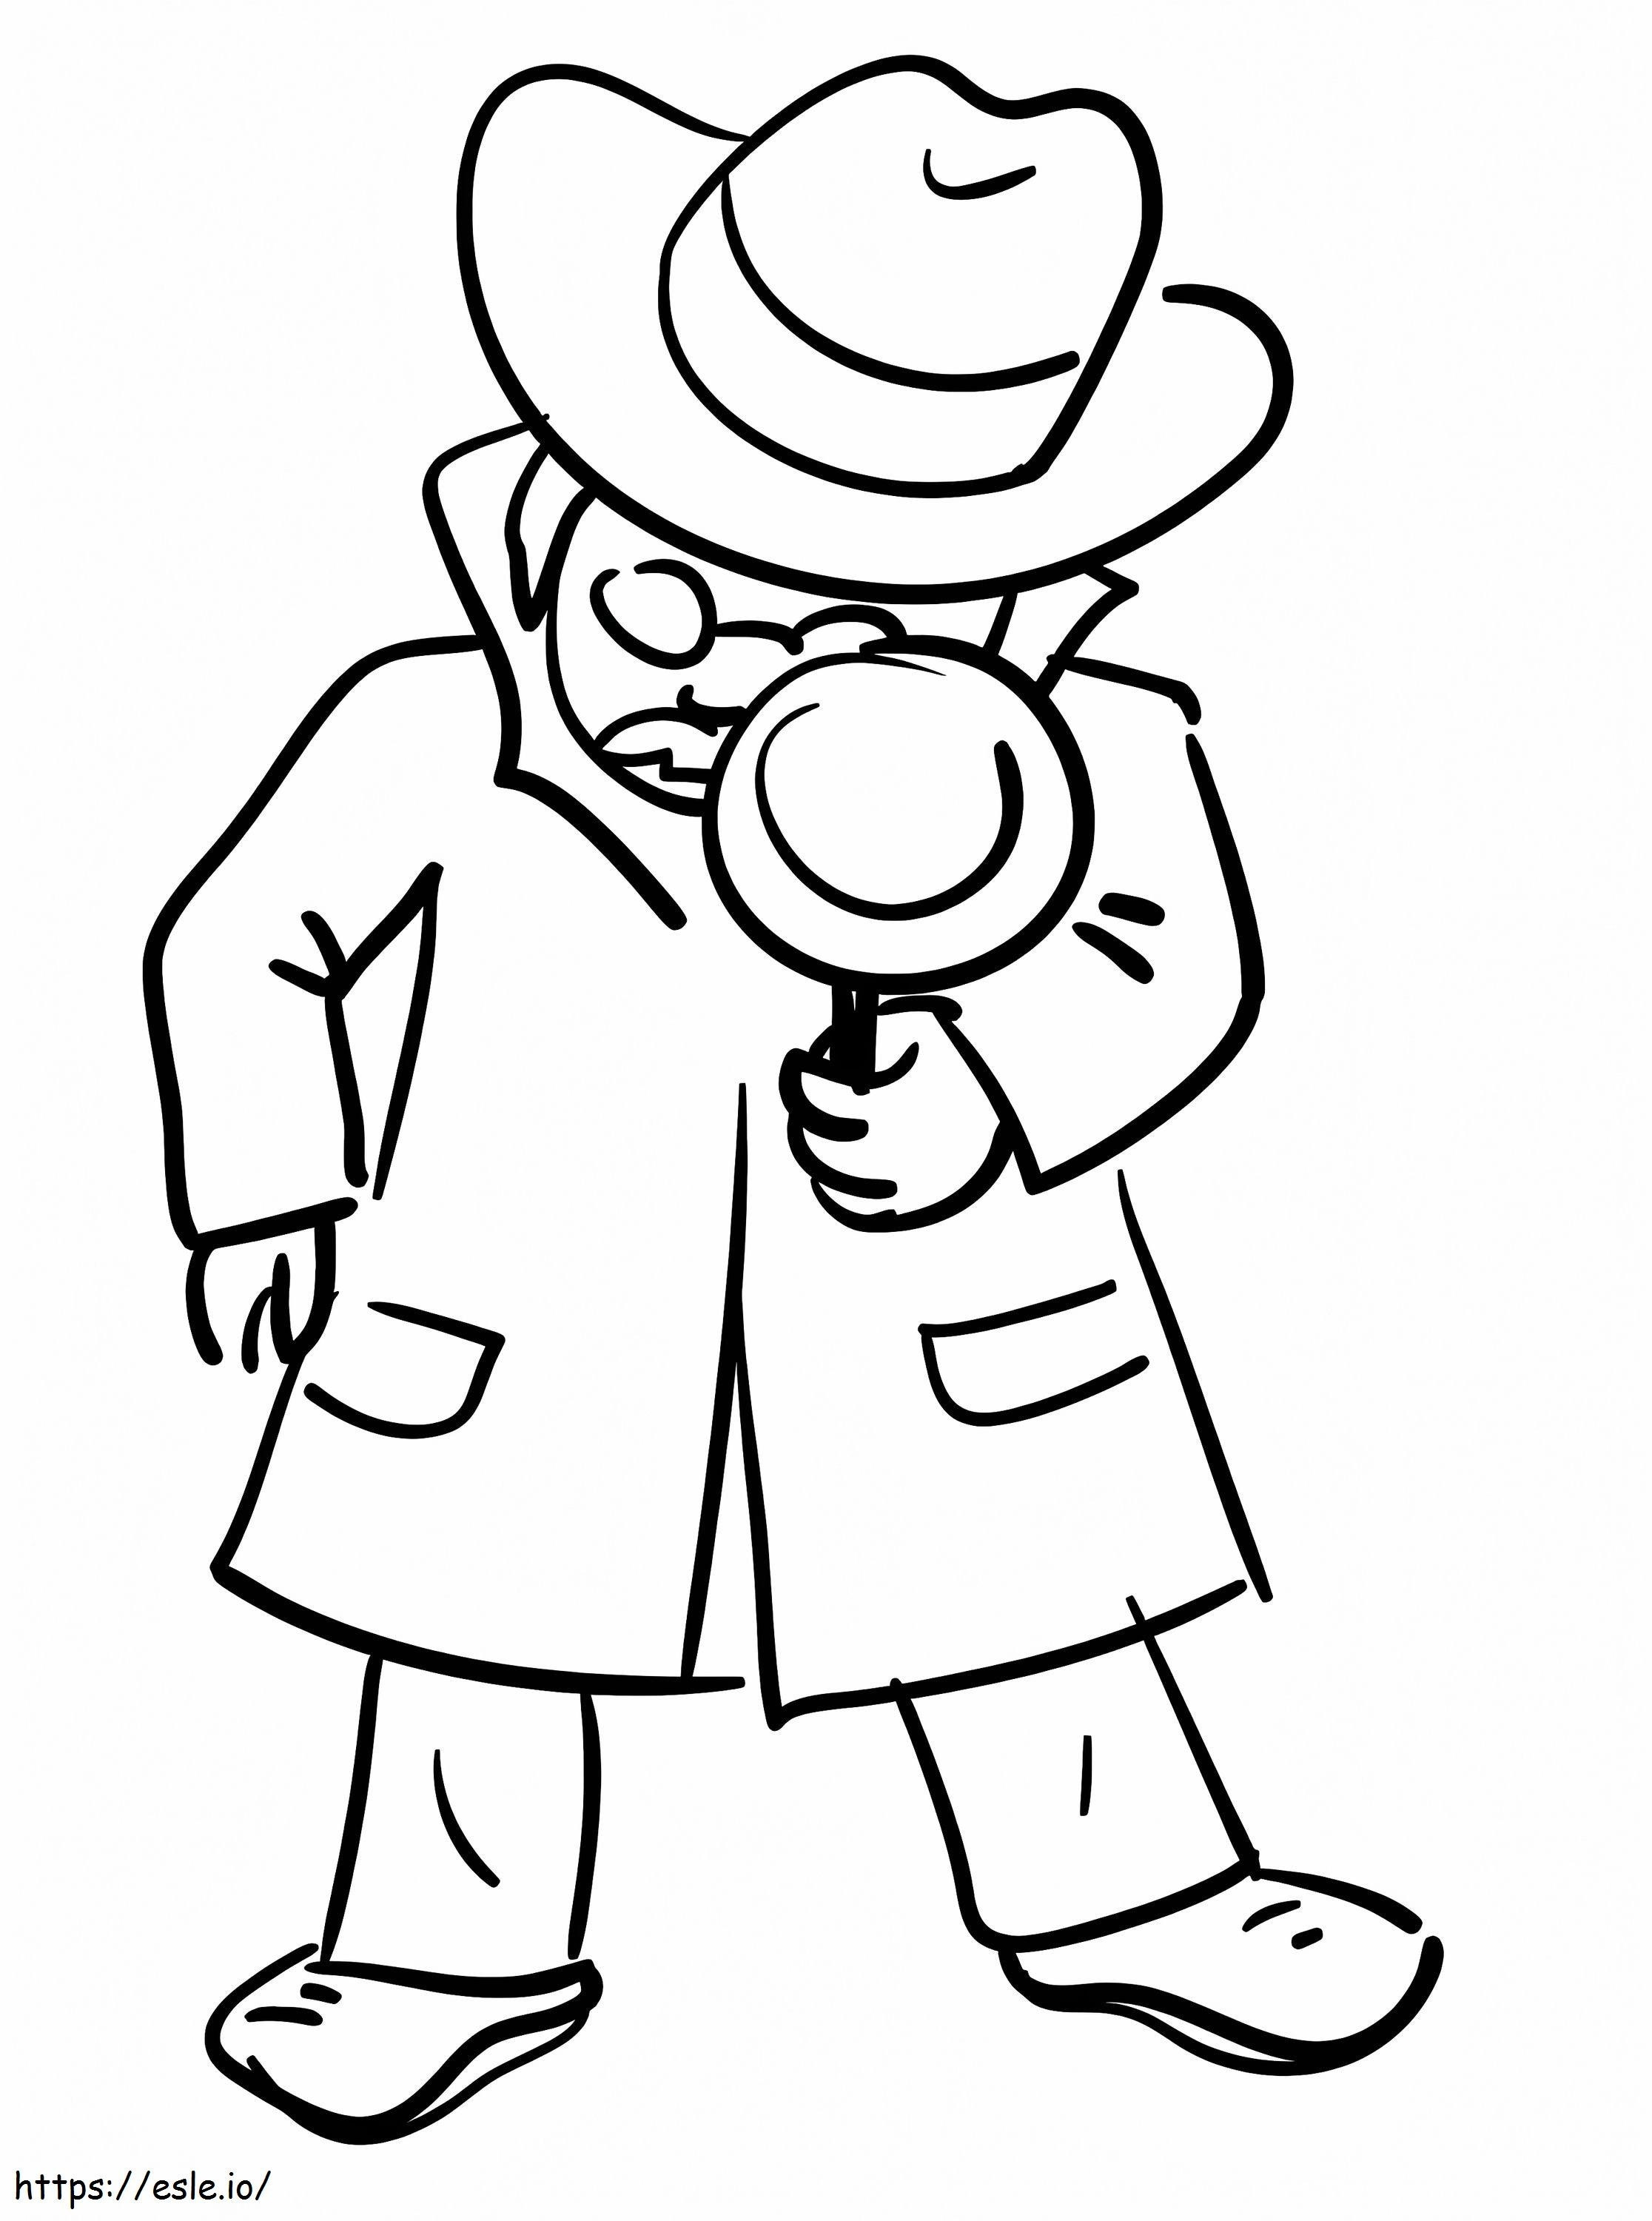 Printable Detective coloring page